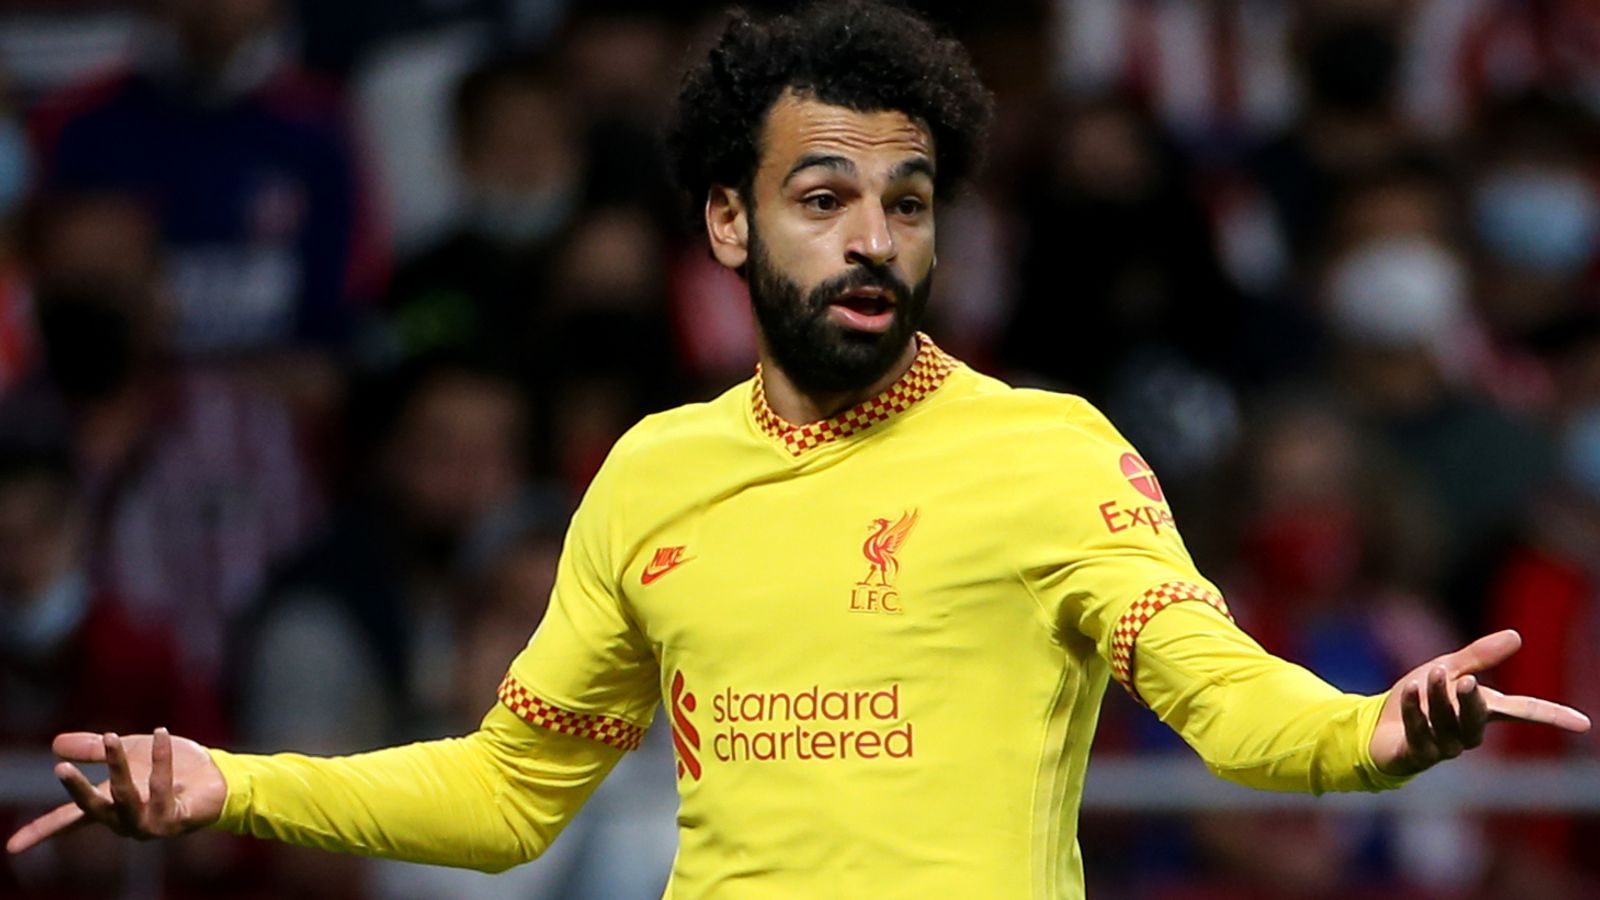 Mohamed Salah argues that the reason for Liverpool's contract delay is not just about money